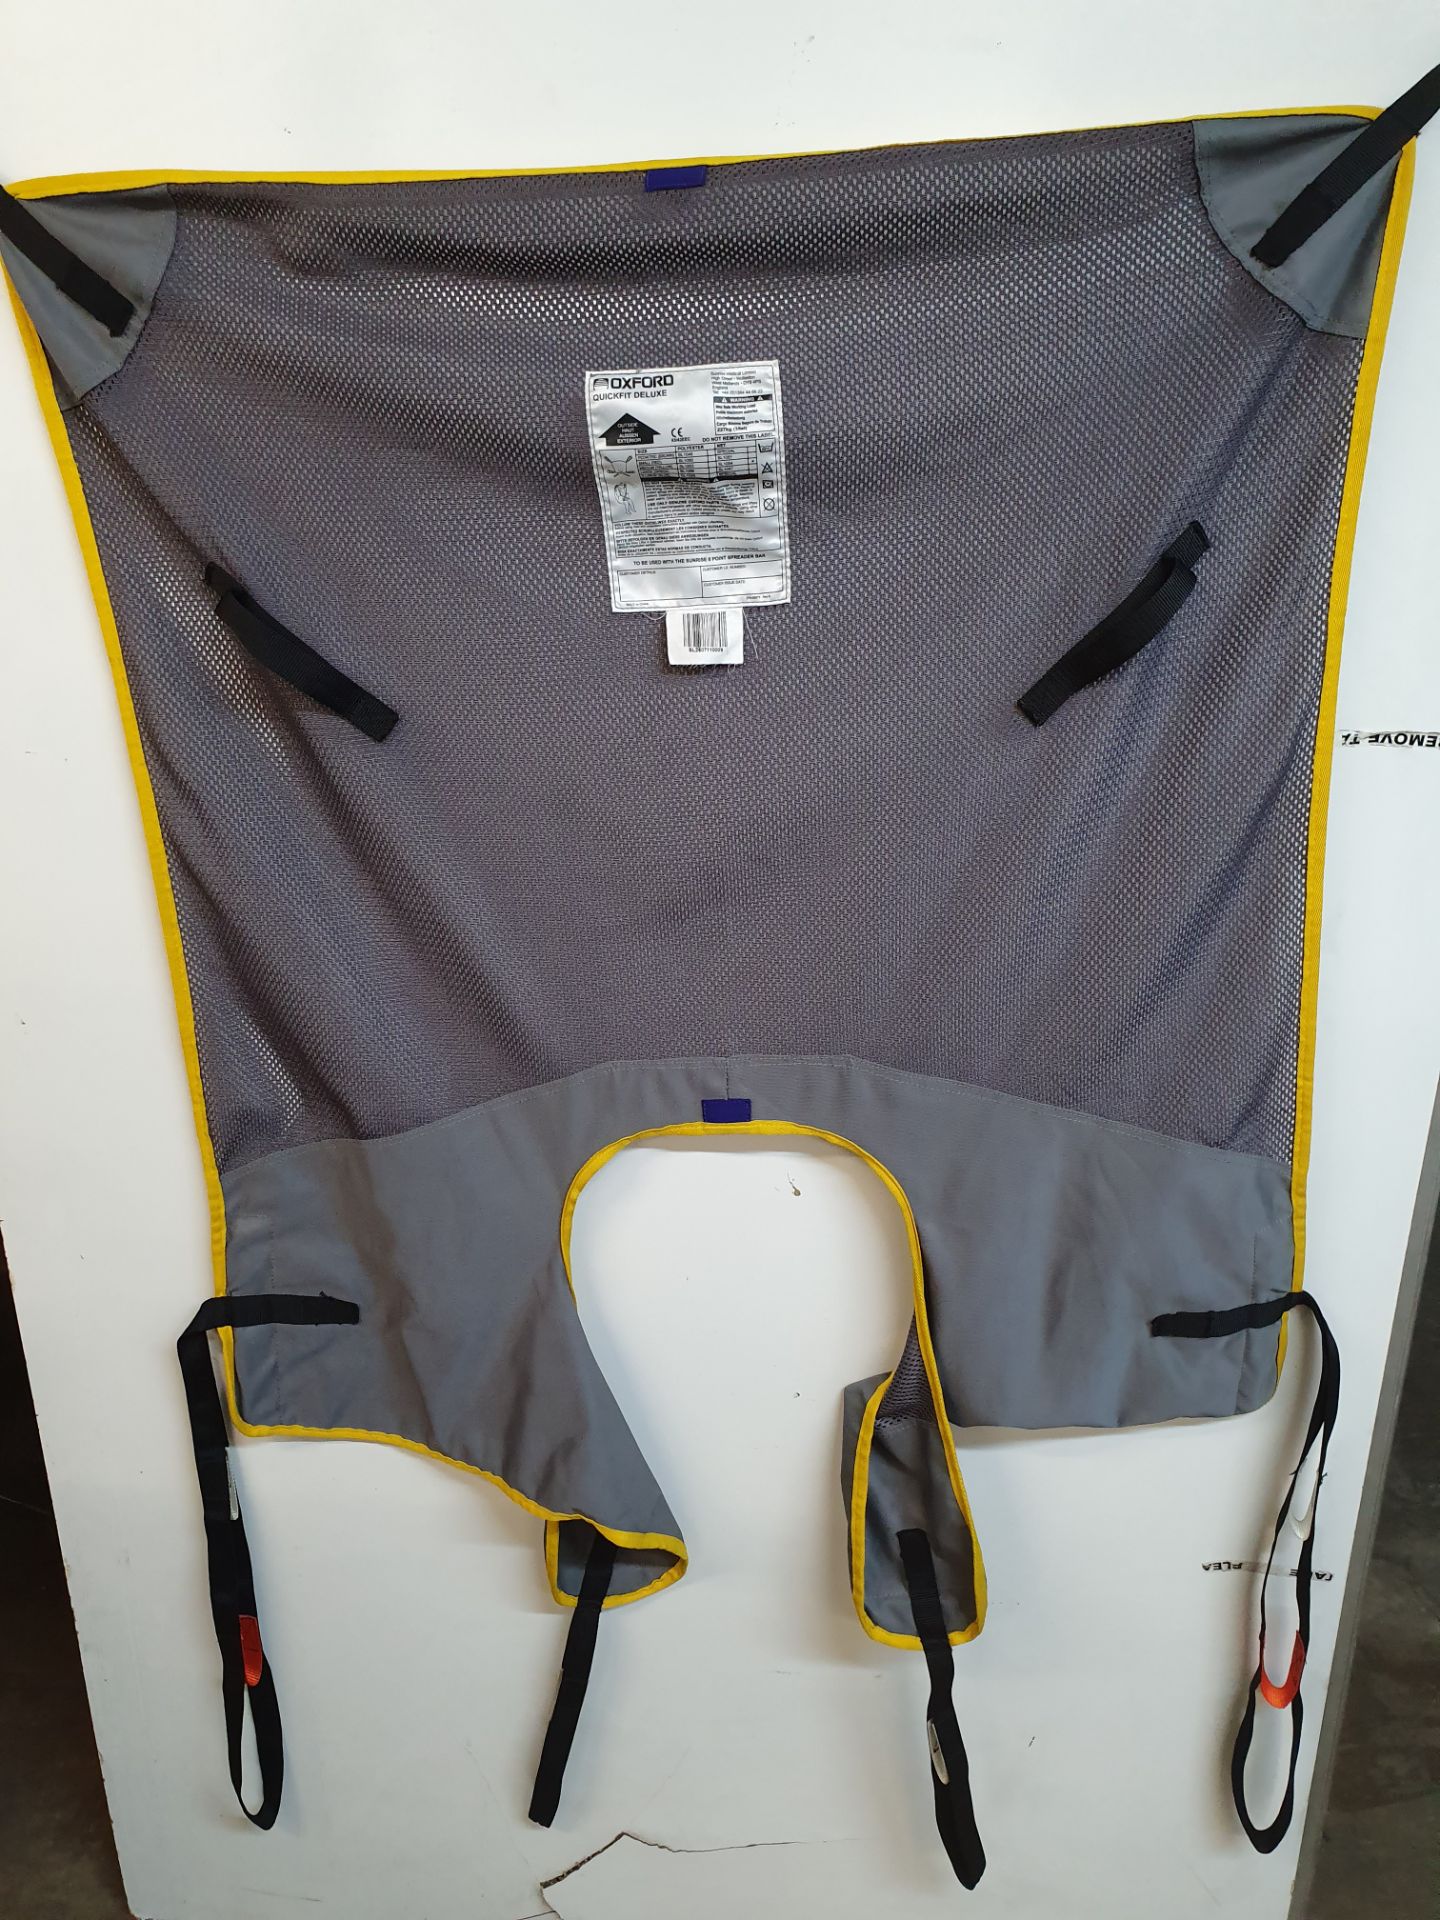 Oxford Quickfit Deluxe Harness